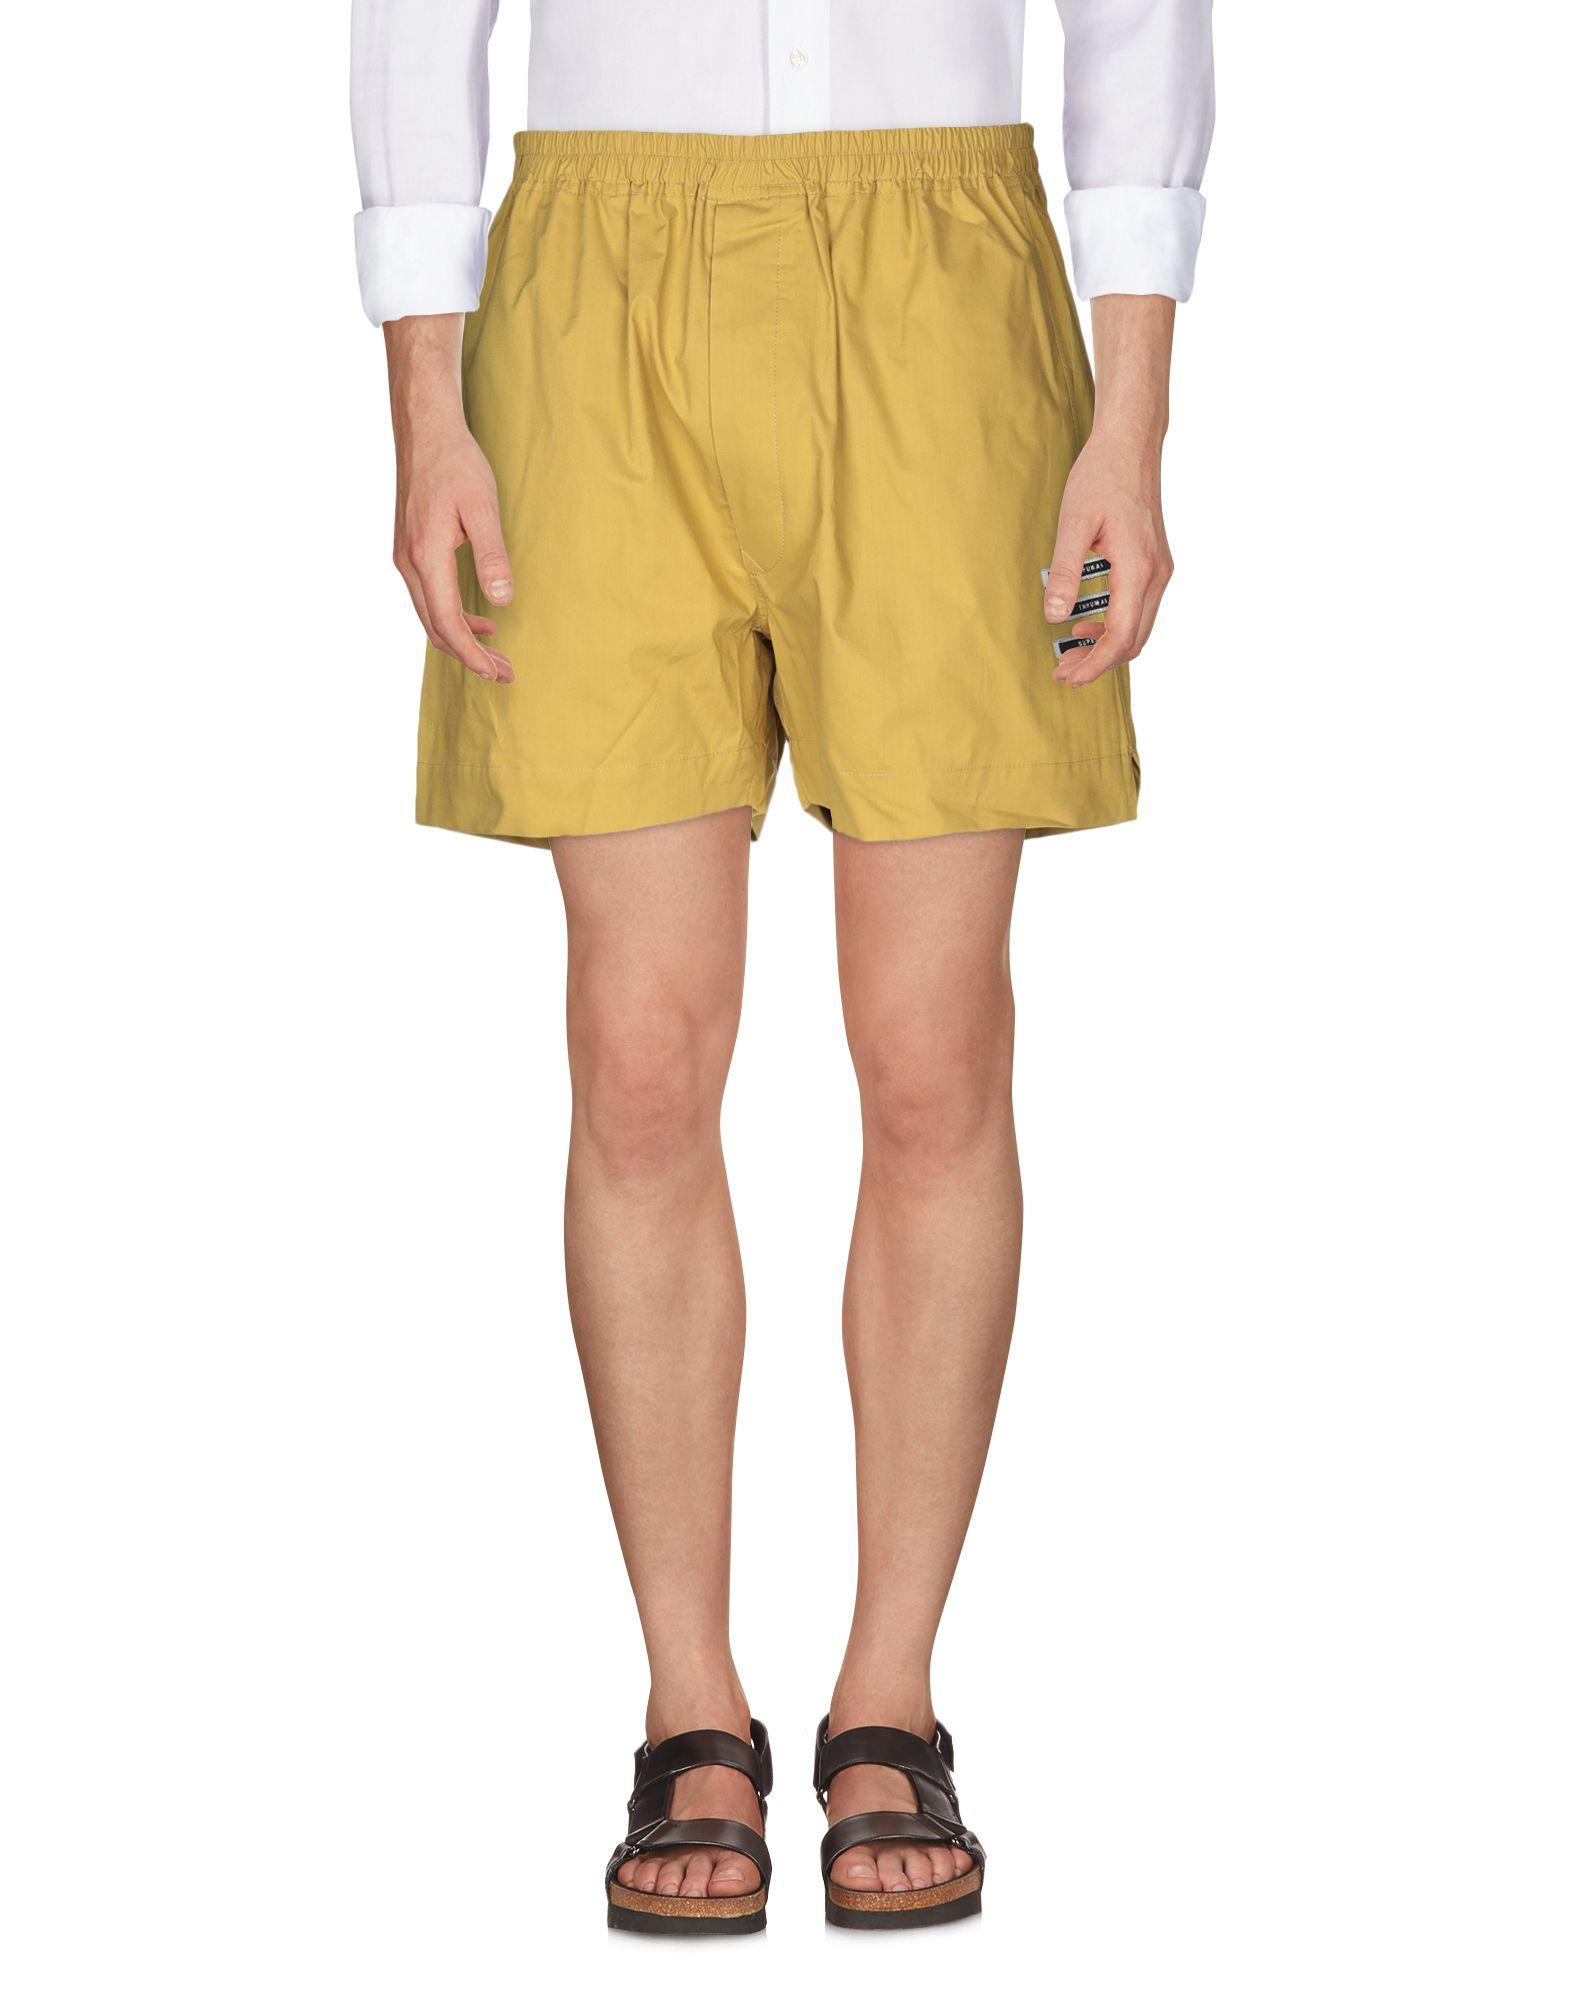 Rick Owens Drkshdw Cotton Shorts in Yellow for Men - Lyst